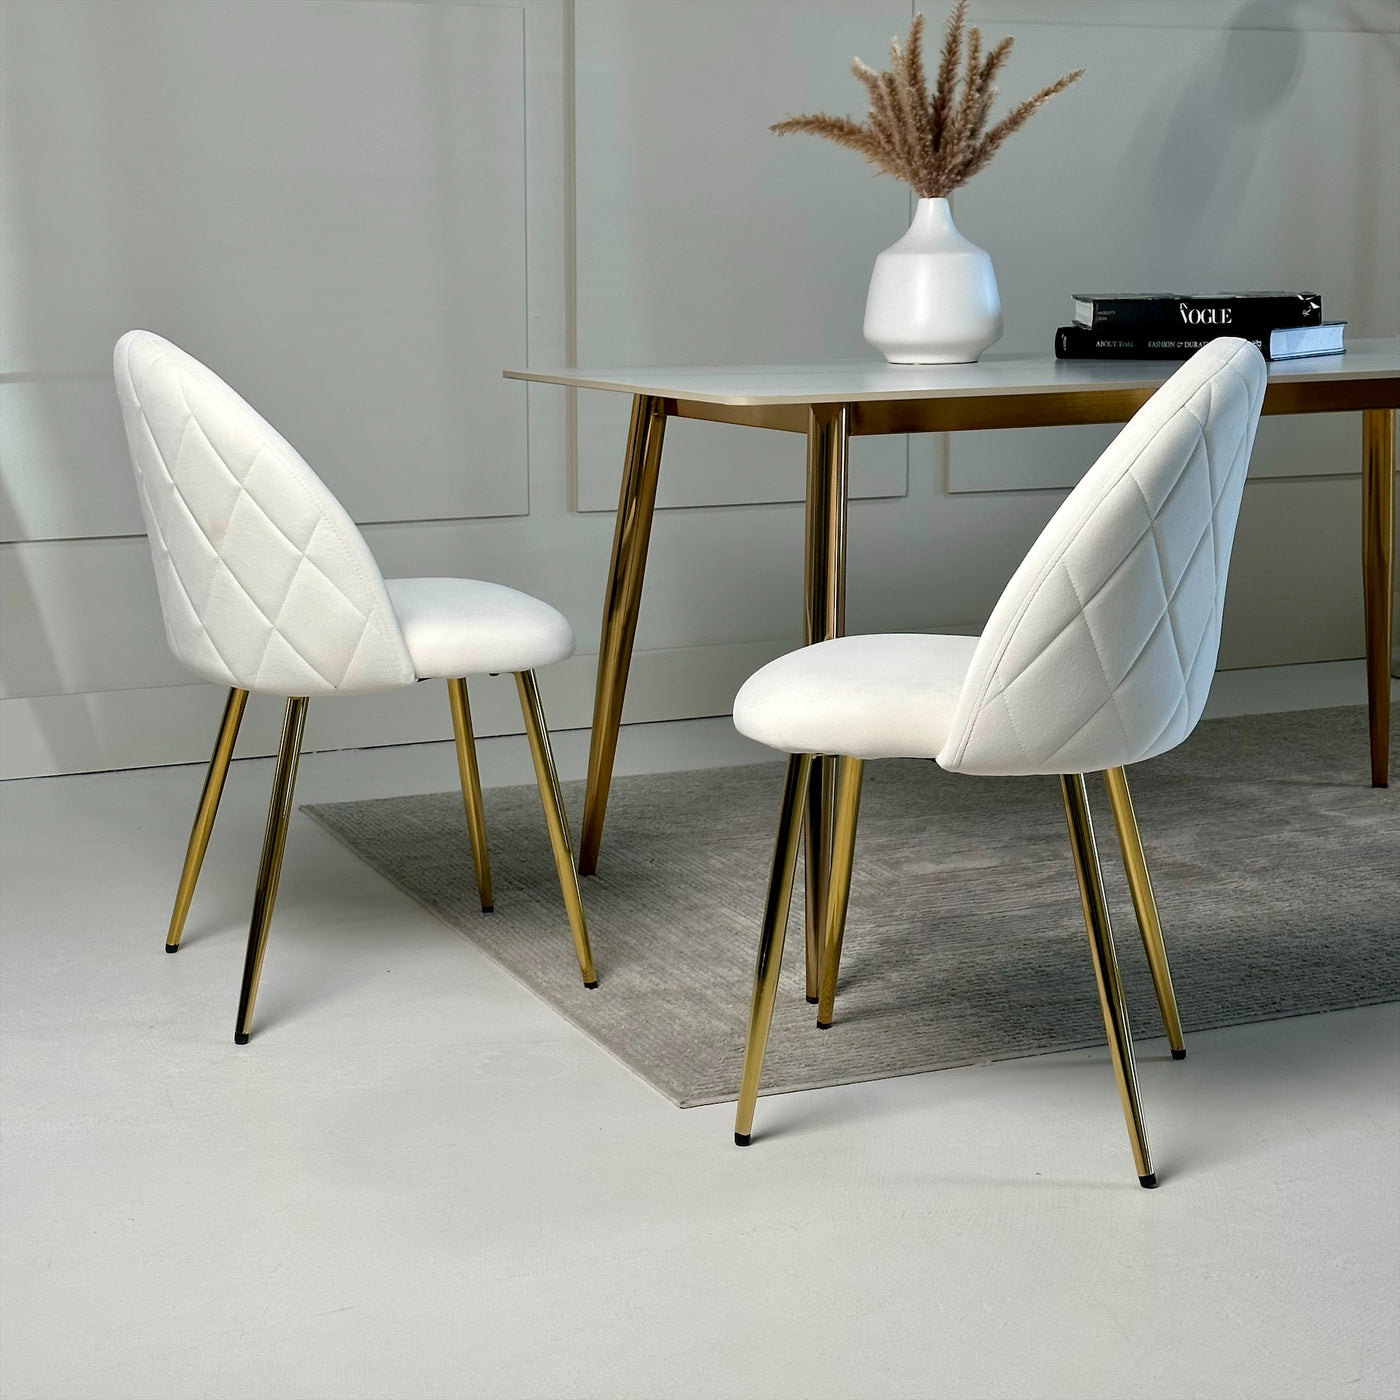 Beige velvet dining chairs with gold legs